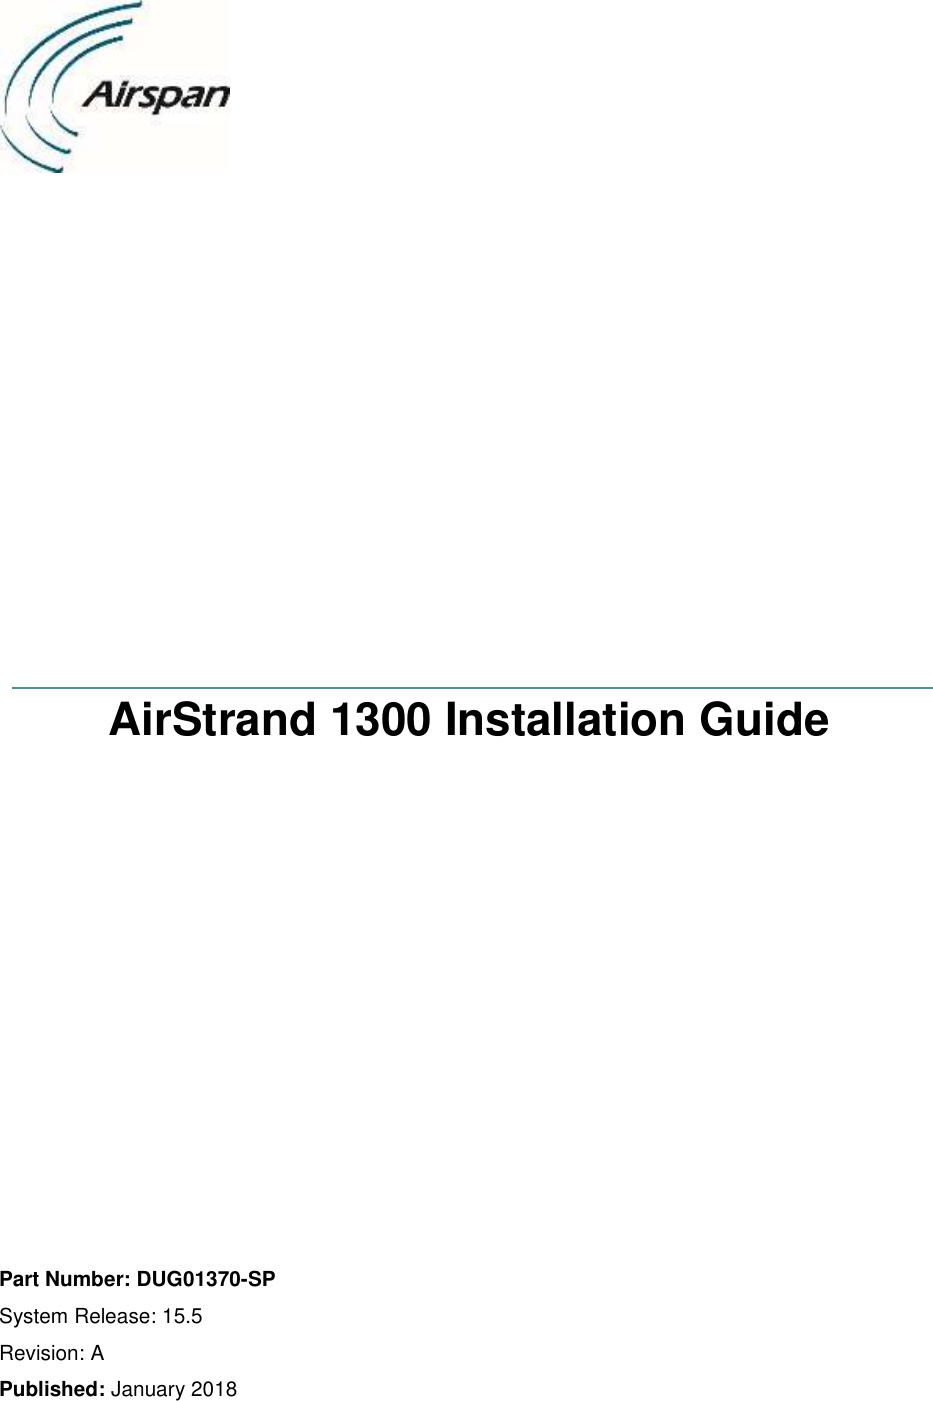                       AirStrand 1300 Installation Guide                Part Number: DUG01370-SP System Release: 15.5 Revision: A Published: January 2018  